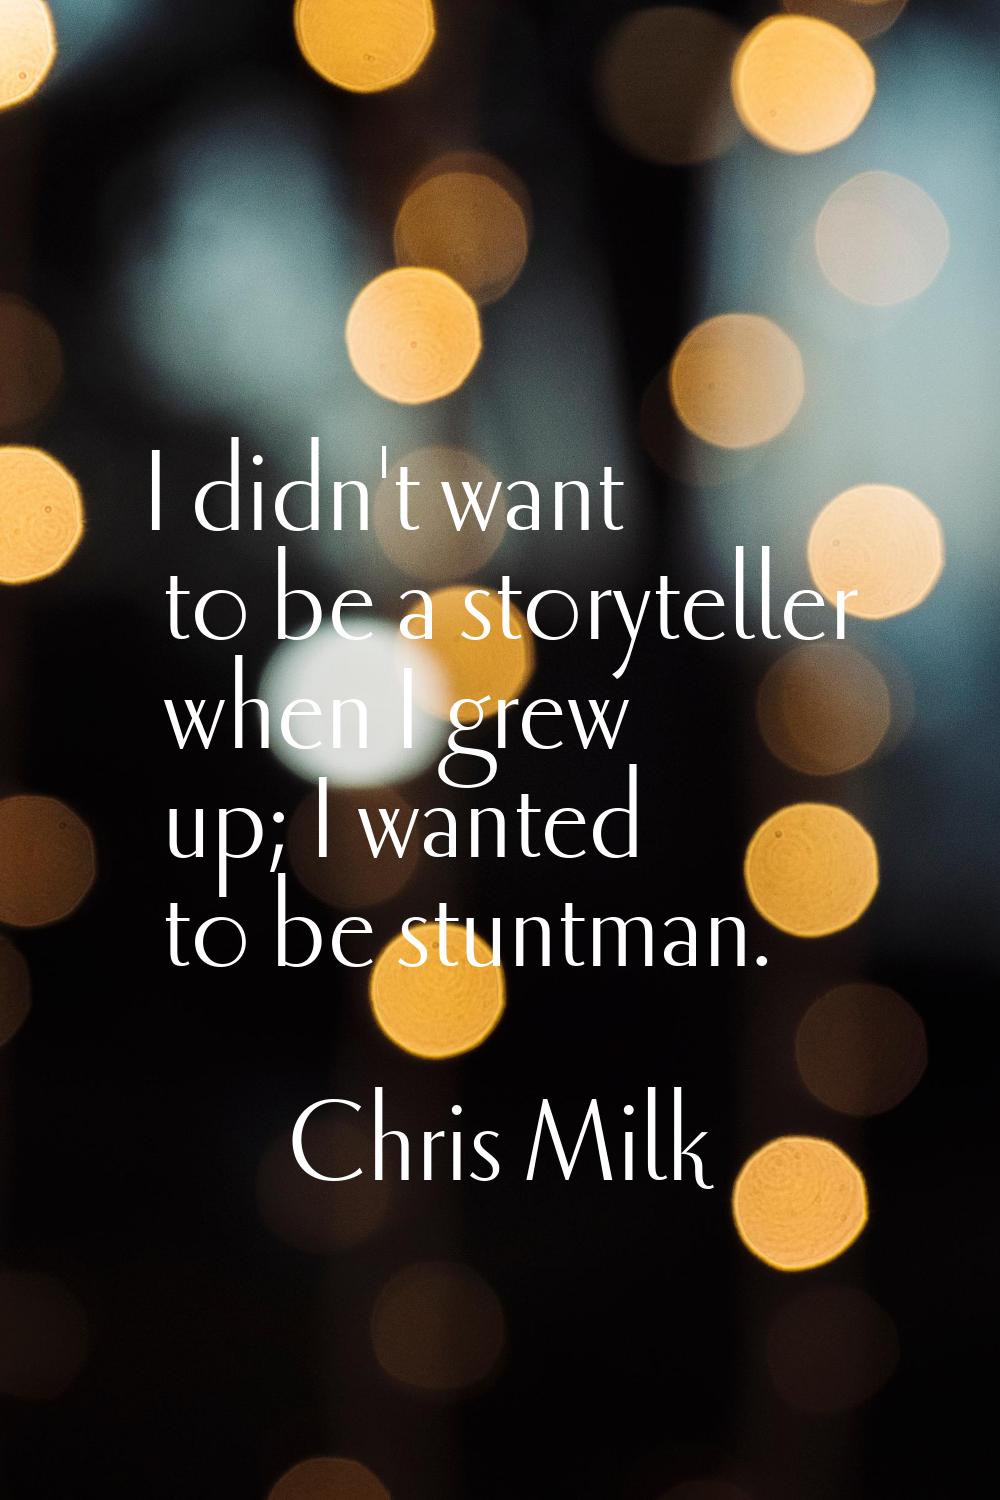 I didn't want to be a storyteller when I grew up; I wanted to be stuntman.